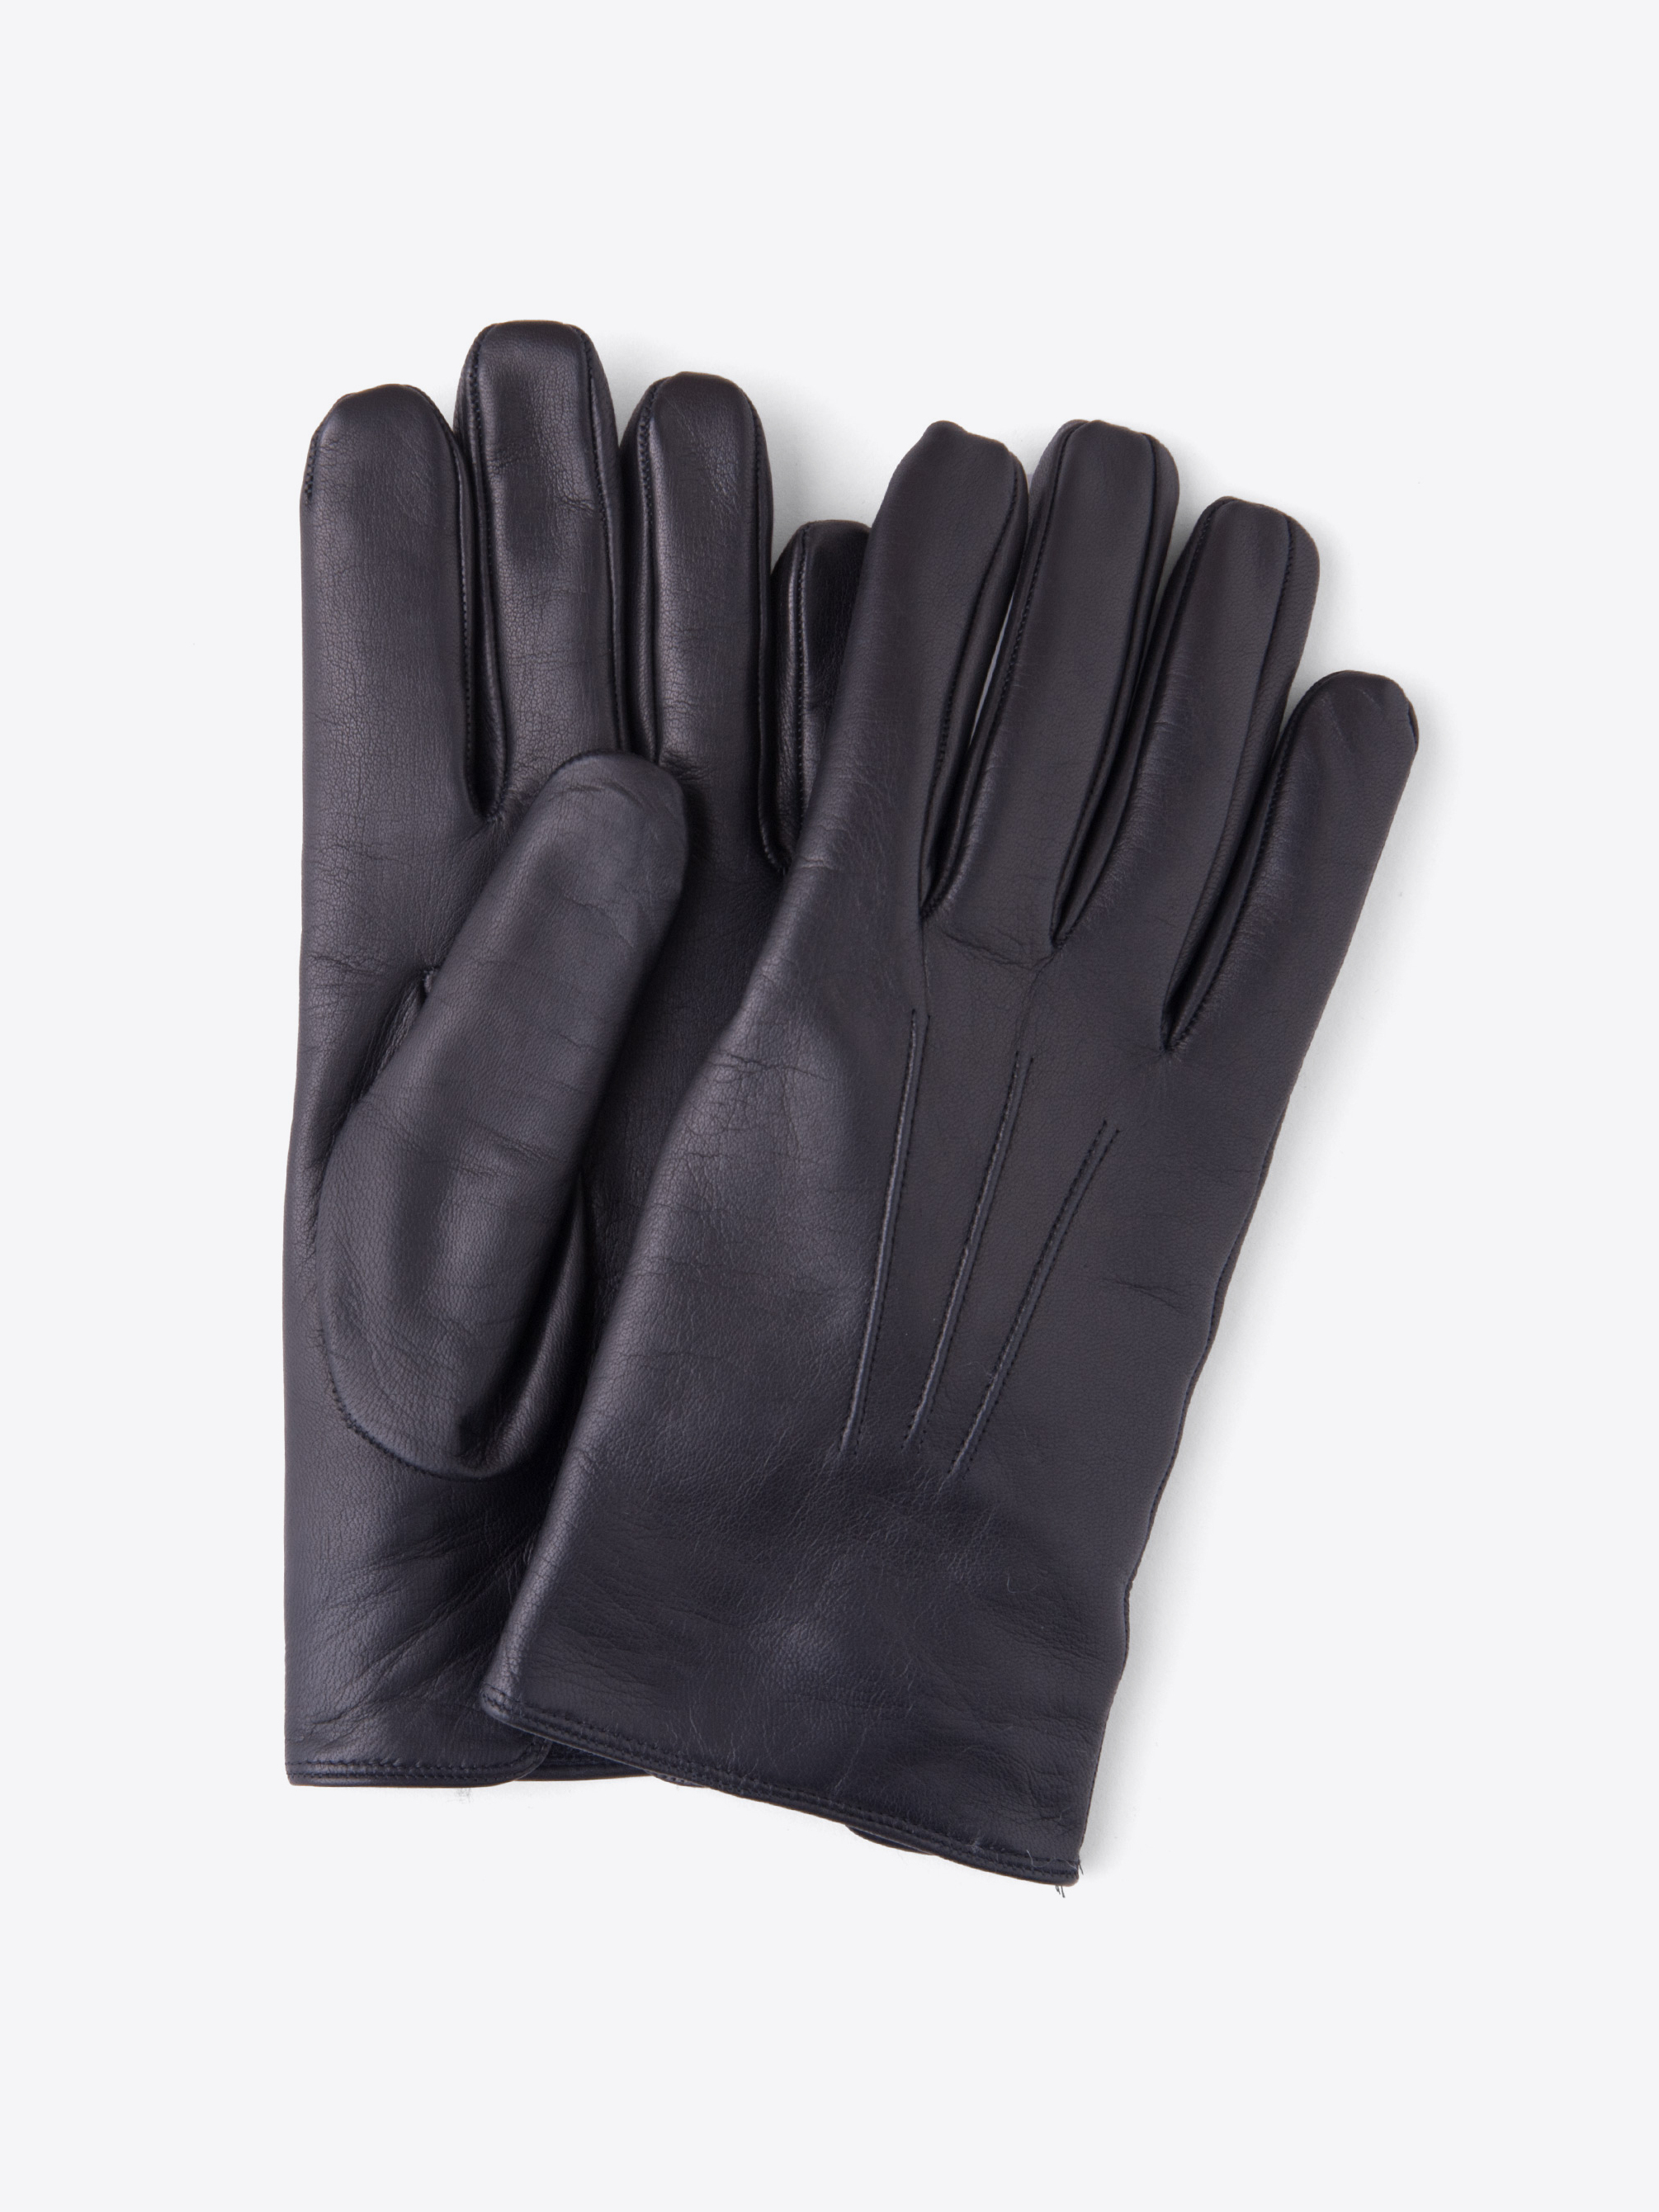 Zoom Image of Black Leather Cashmere Lined Gloves